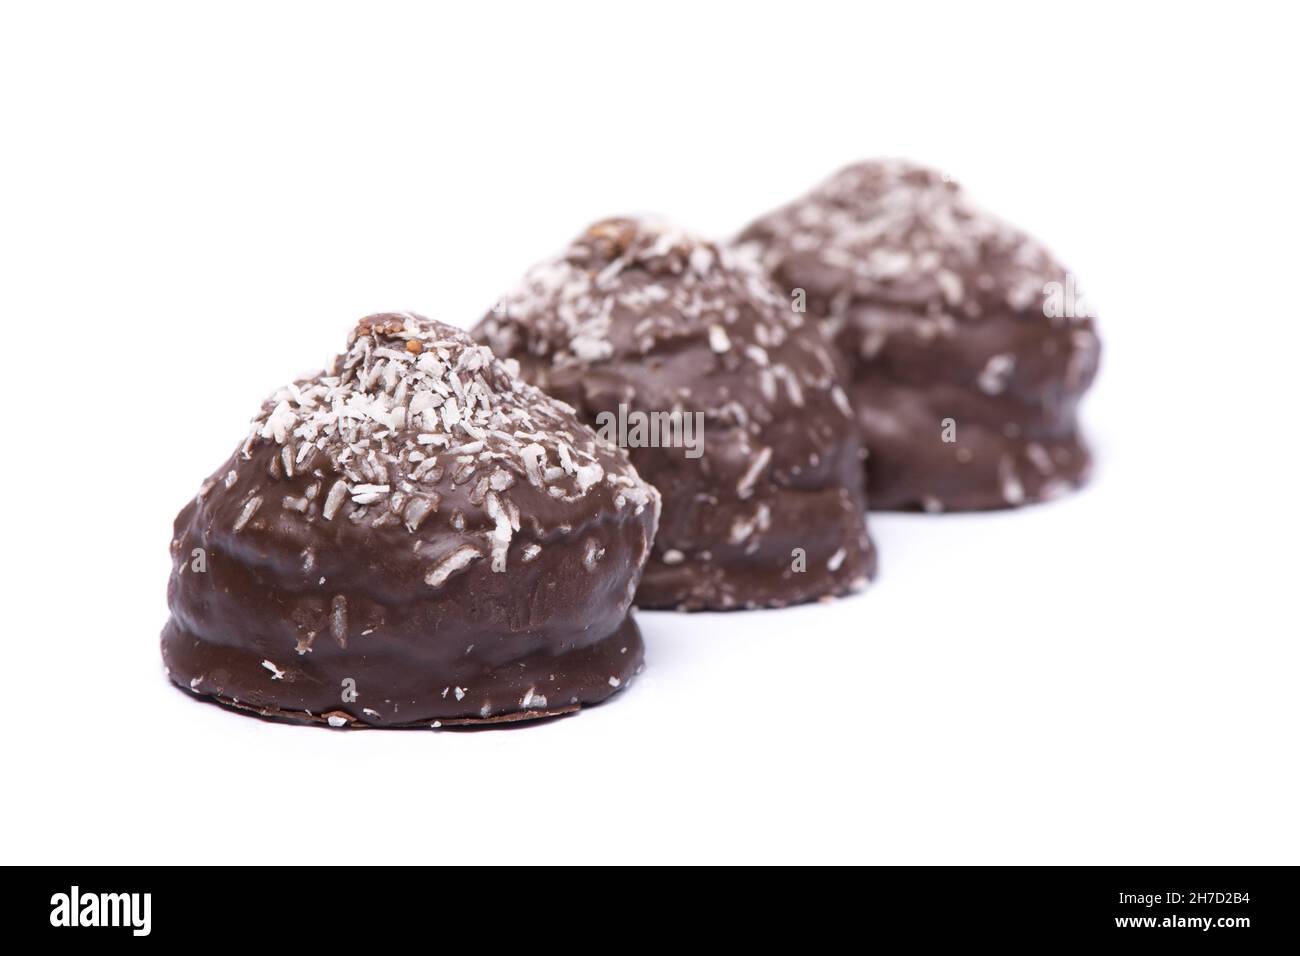 Confectionery, group of chocolate glazed cakes with coconut chips isolated on white background Stock Photo